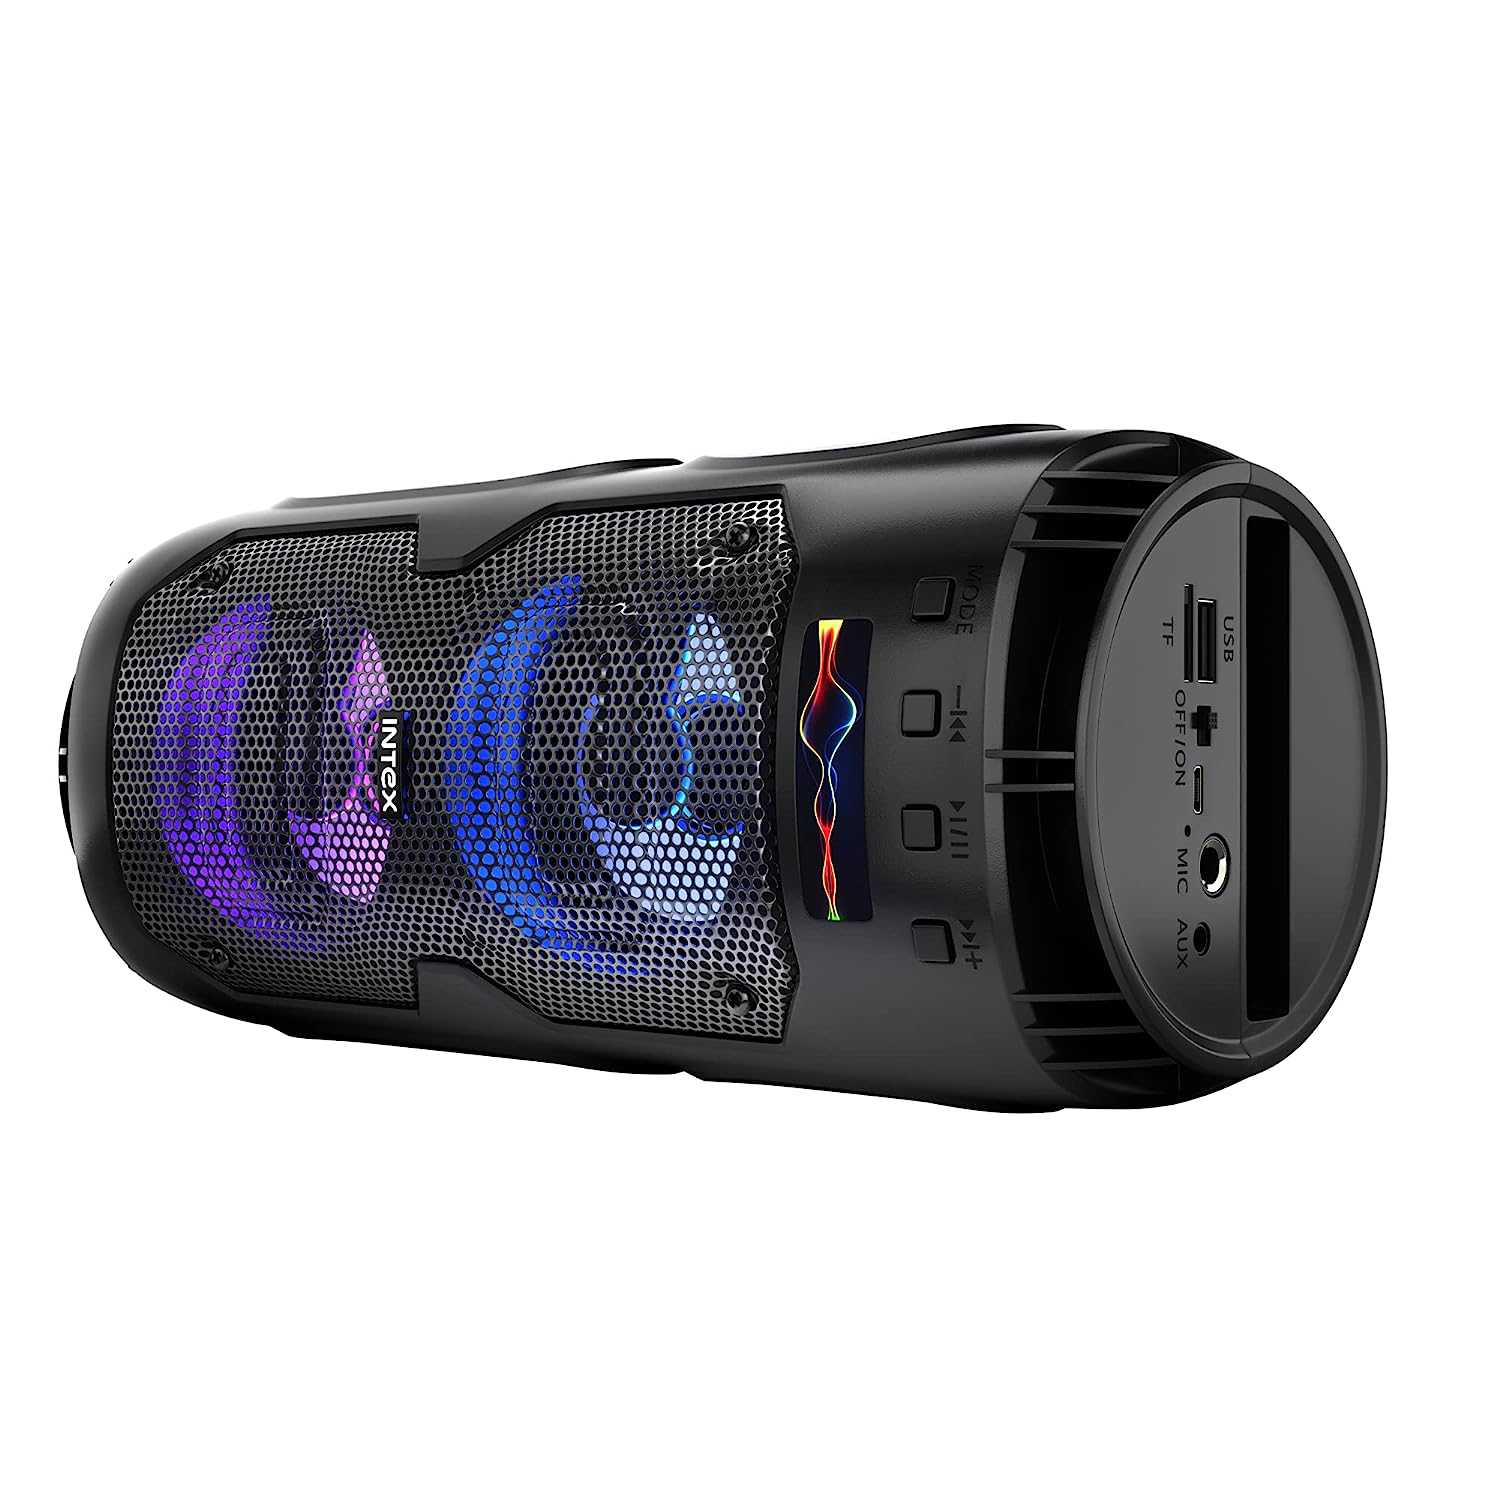 Intex BEAST 1003 Portable Wireless BT Speaker with 12W Sound Output, Up to 8 Hrs Music Play Time, True Wireless Feature, Multi-Connectivity Modes (Black)